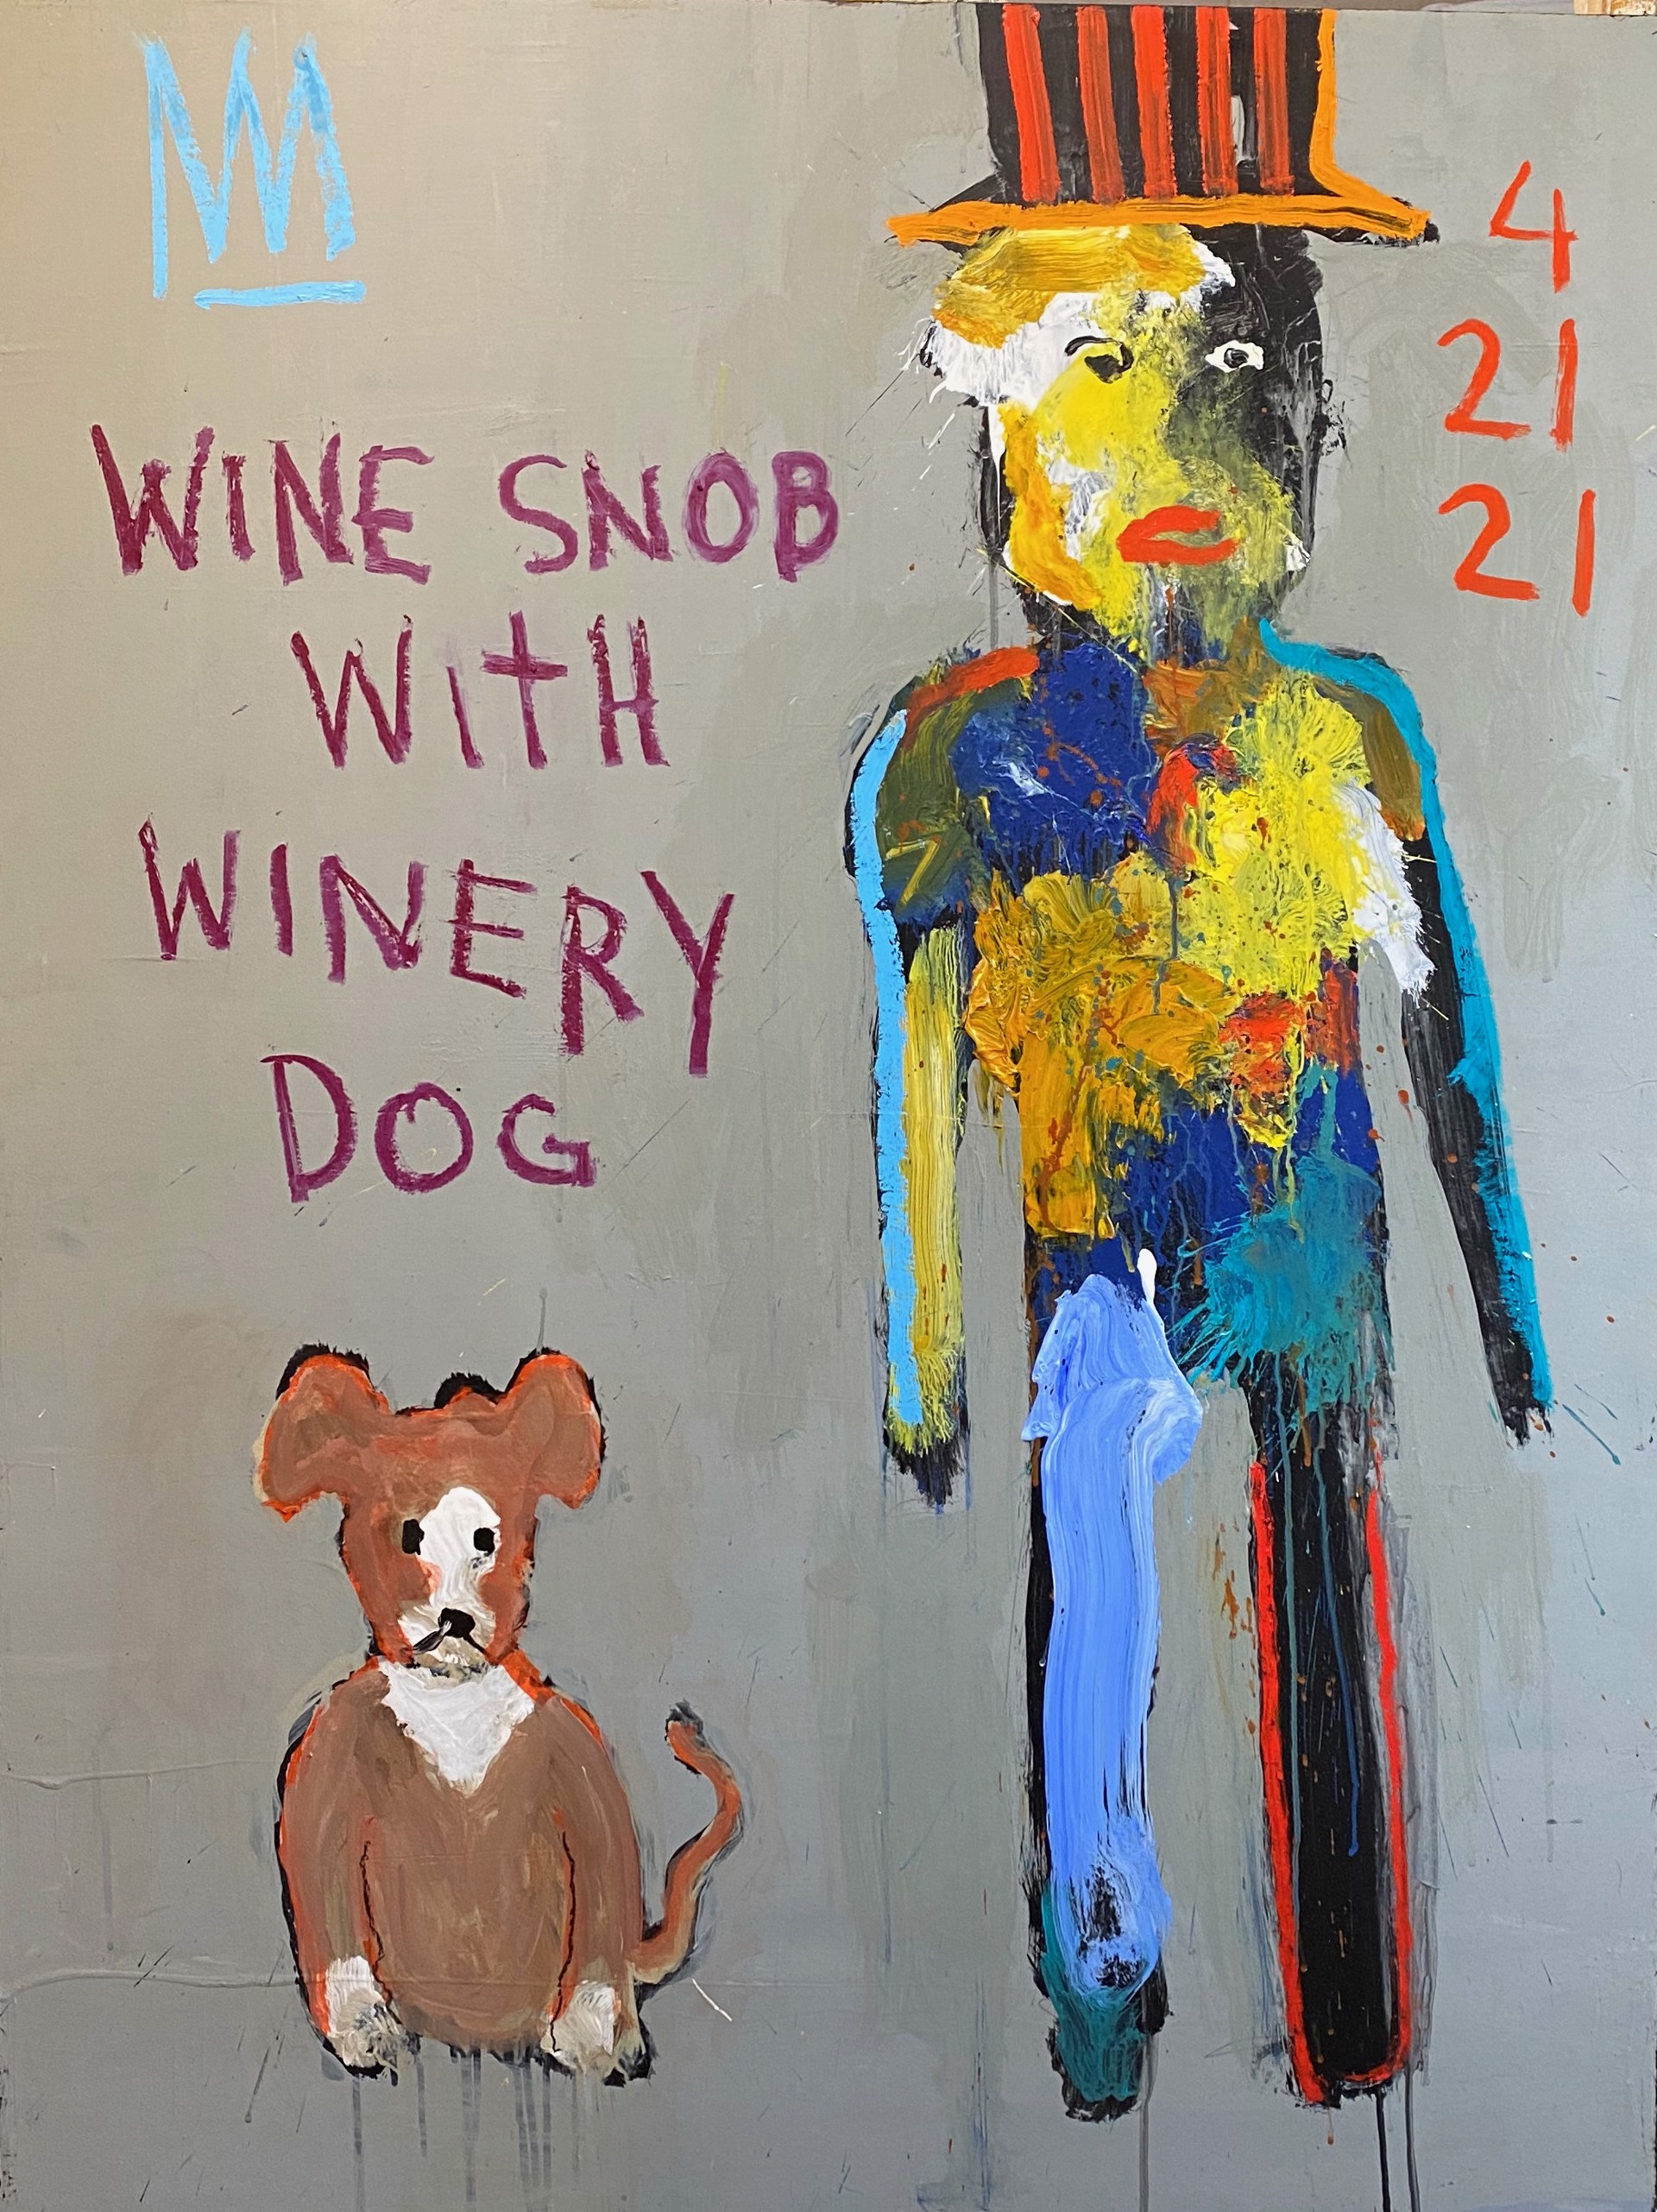 Wine Snob with Winery Dog by Michael Snodgrass